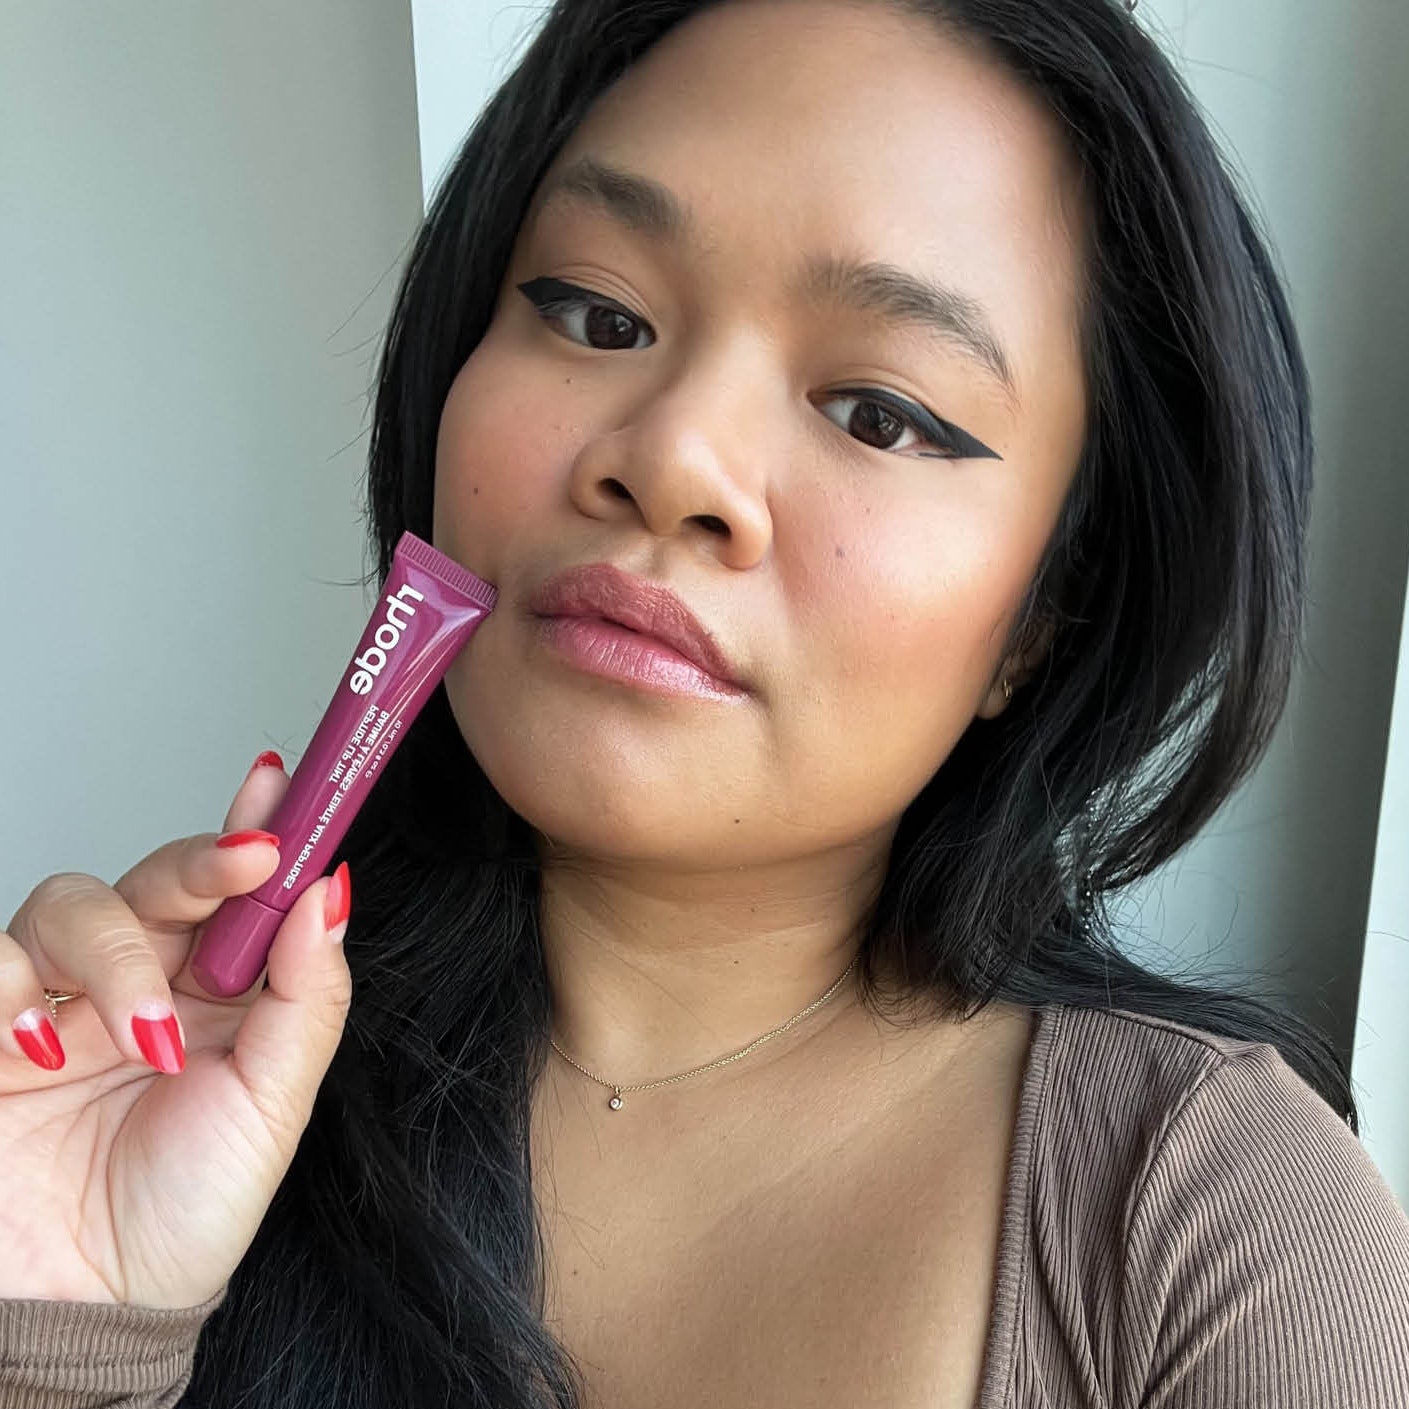 I Tried Rhode’s New Tinted Lip Treatment To See if It Was Worth the TikTok Hype